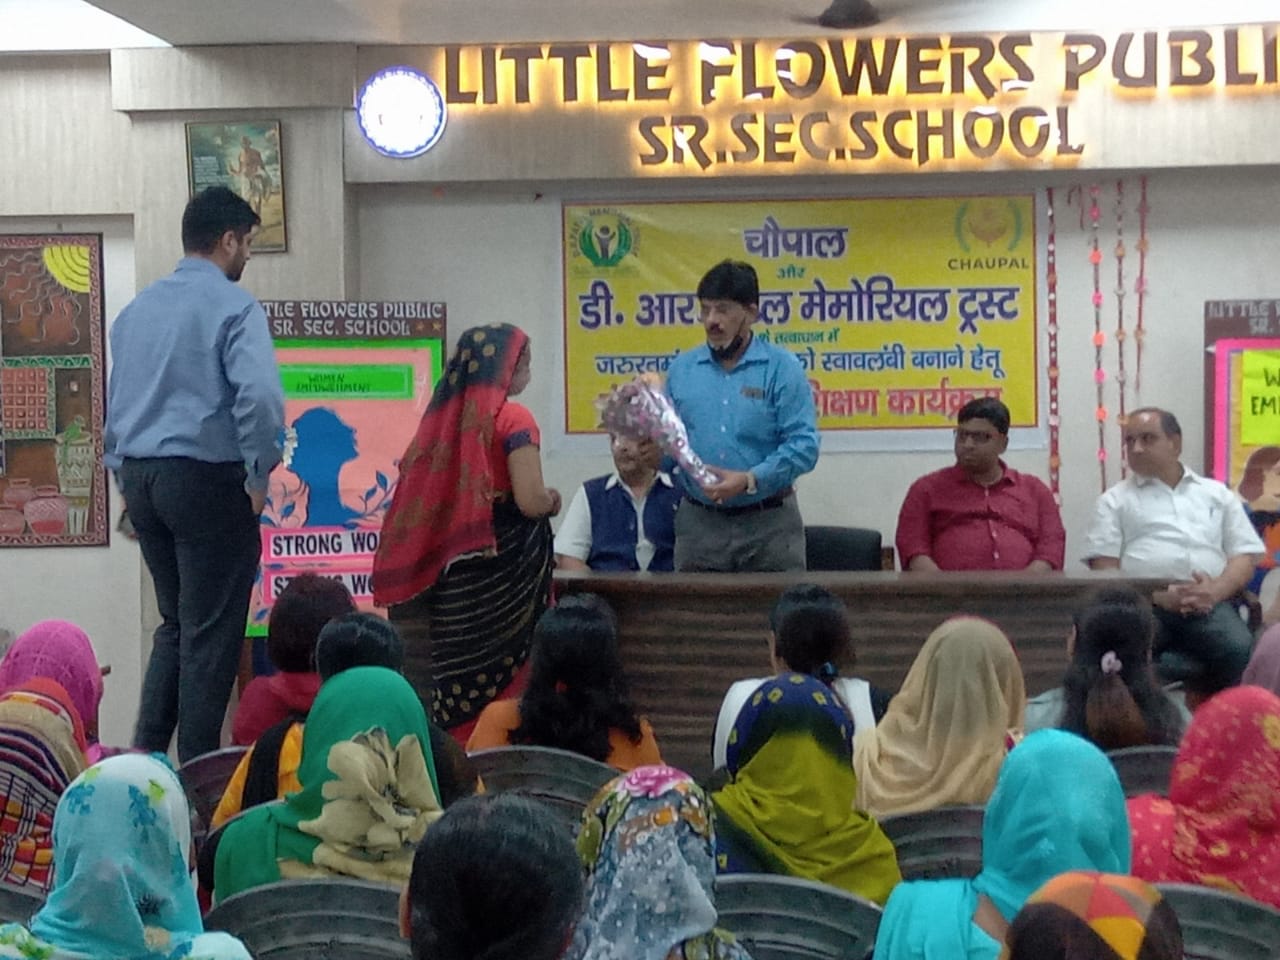  Chaupal and D.R.Patel Memorial Trust organised a cleanliness product producing workshop for poor women at Little Flowers Public Sr Sec School.